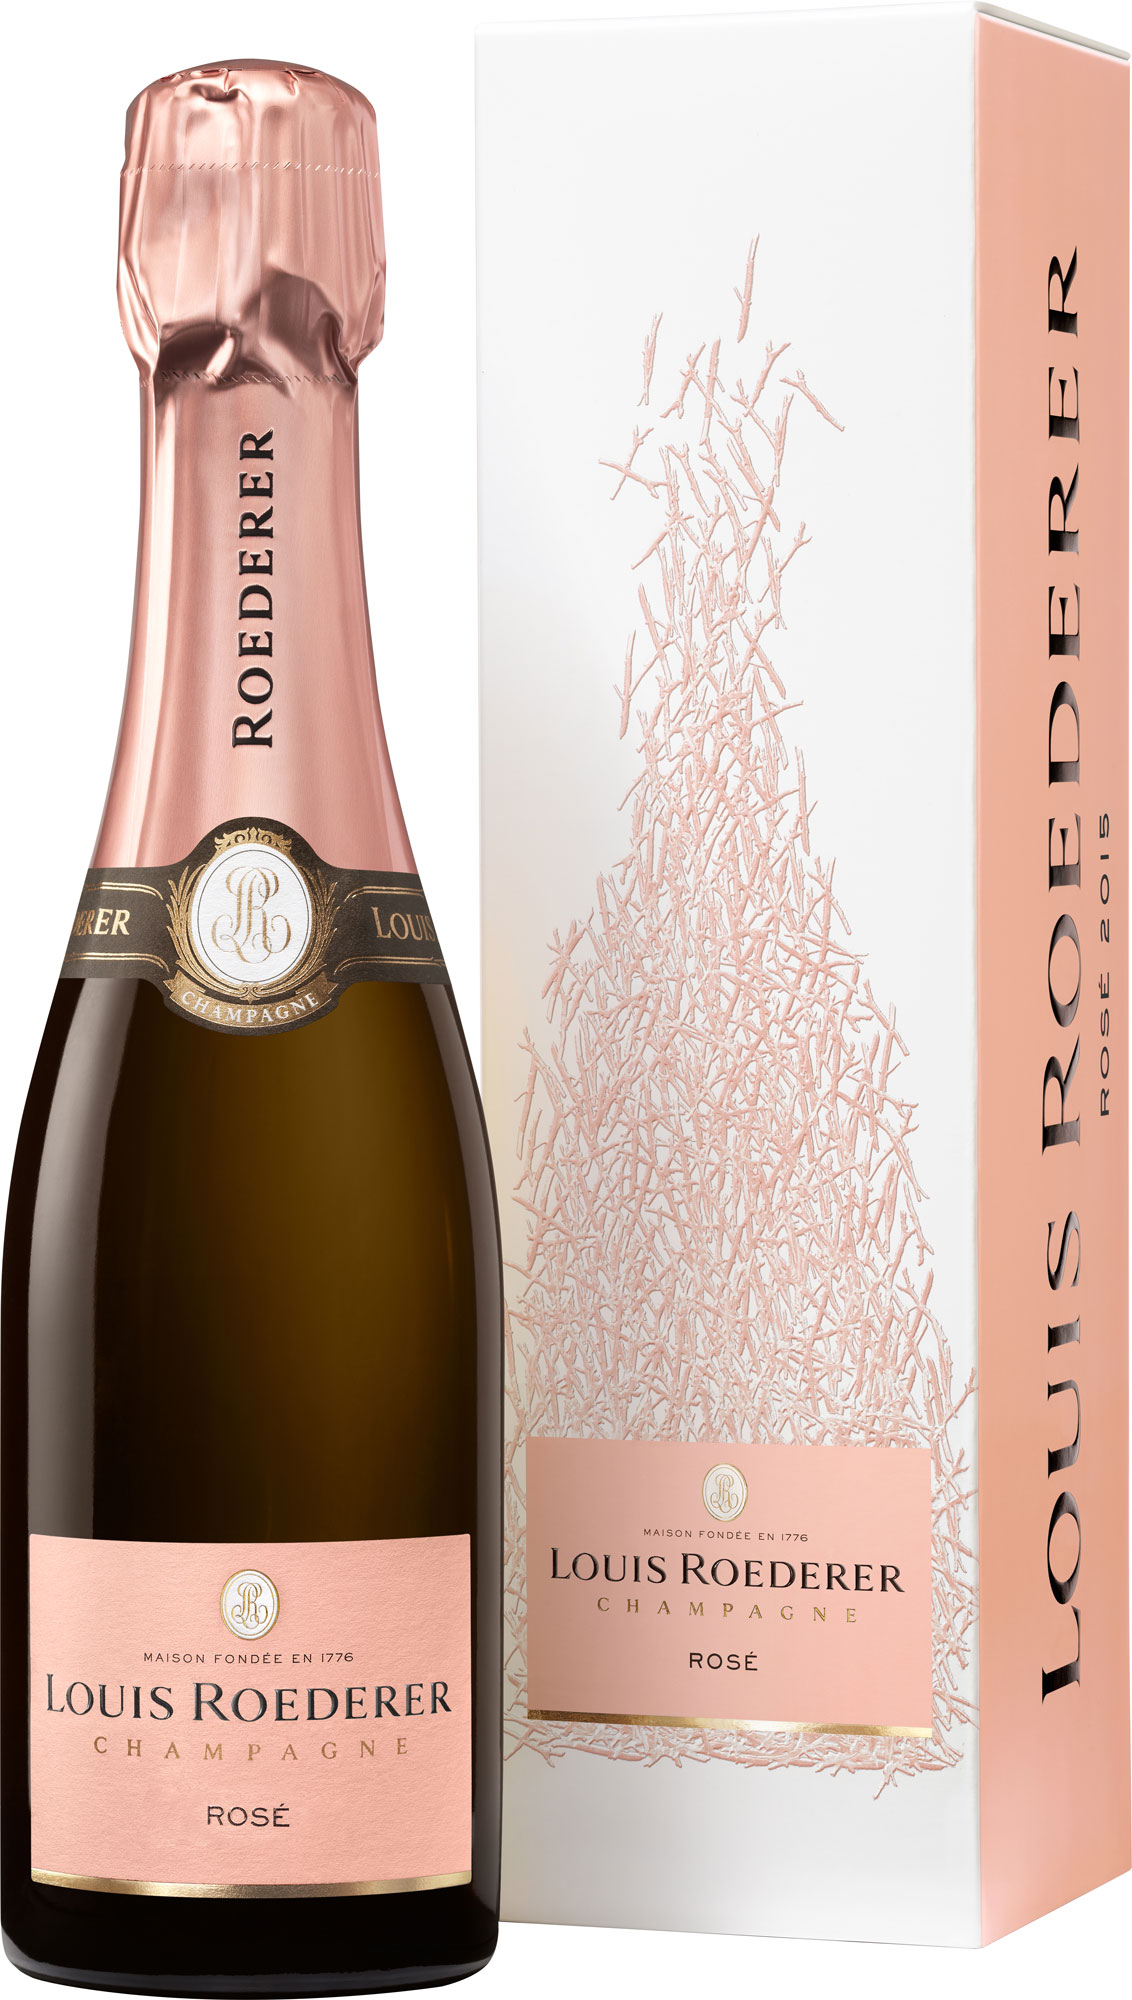 on find+buy | Champagner special occasions wein.plus